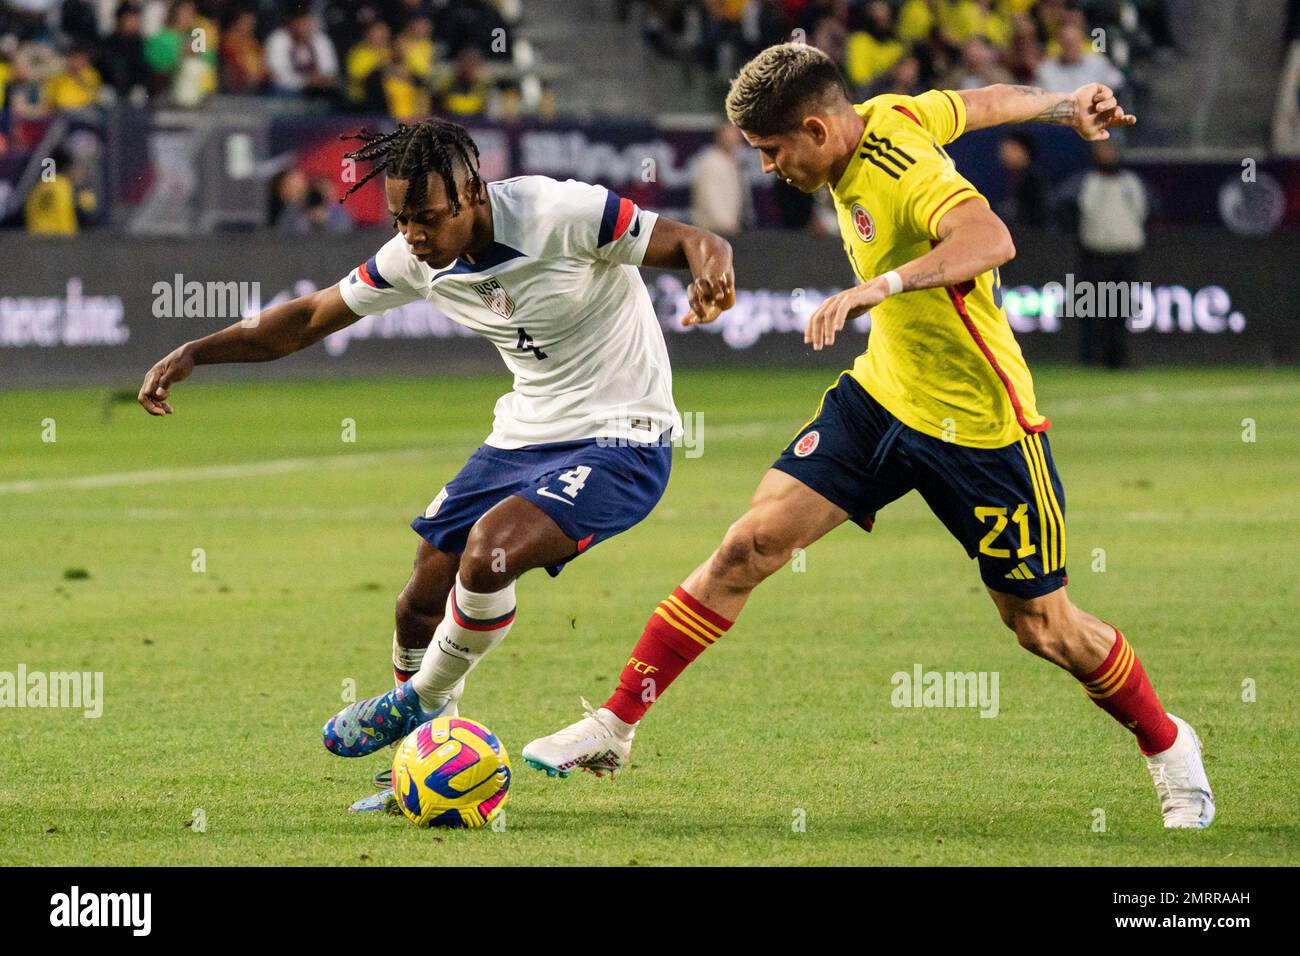 United States of America defender DeJuan Jones (4) and Colombia midfielder Jorman Campuzano (21) fight for possession during an international friendly Stock Photo